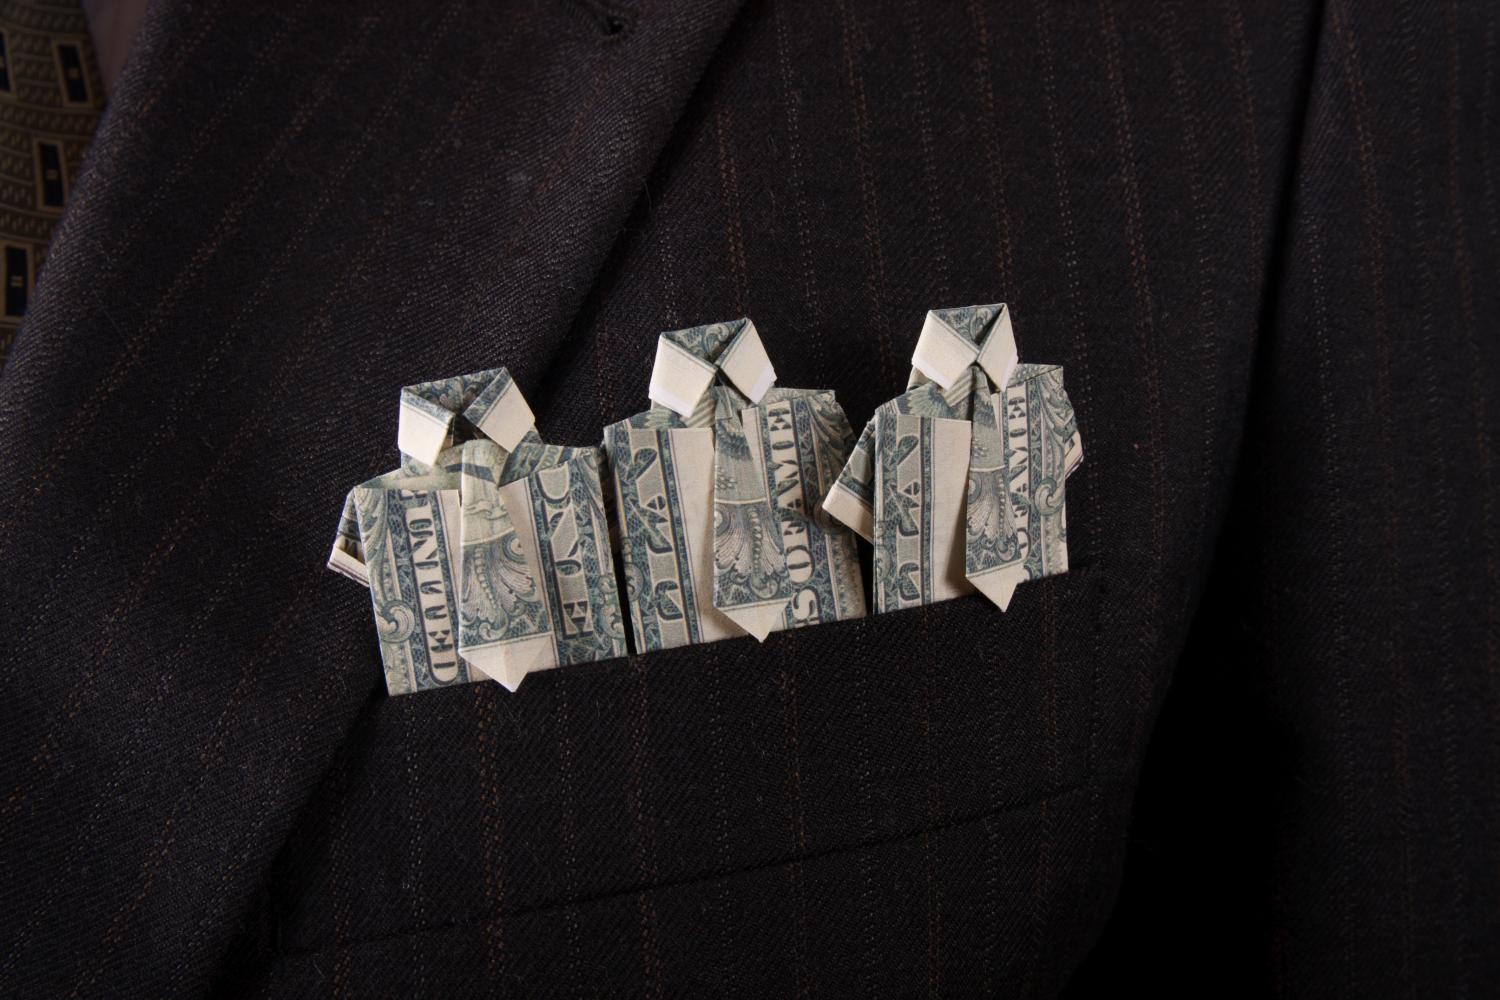 Dollar bills folded into origami suits